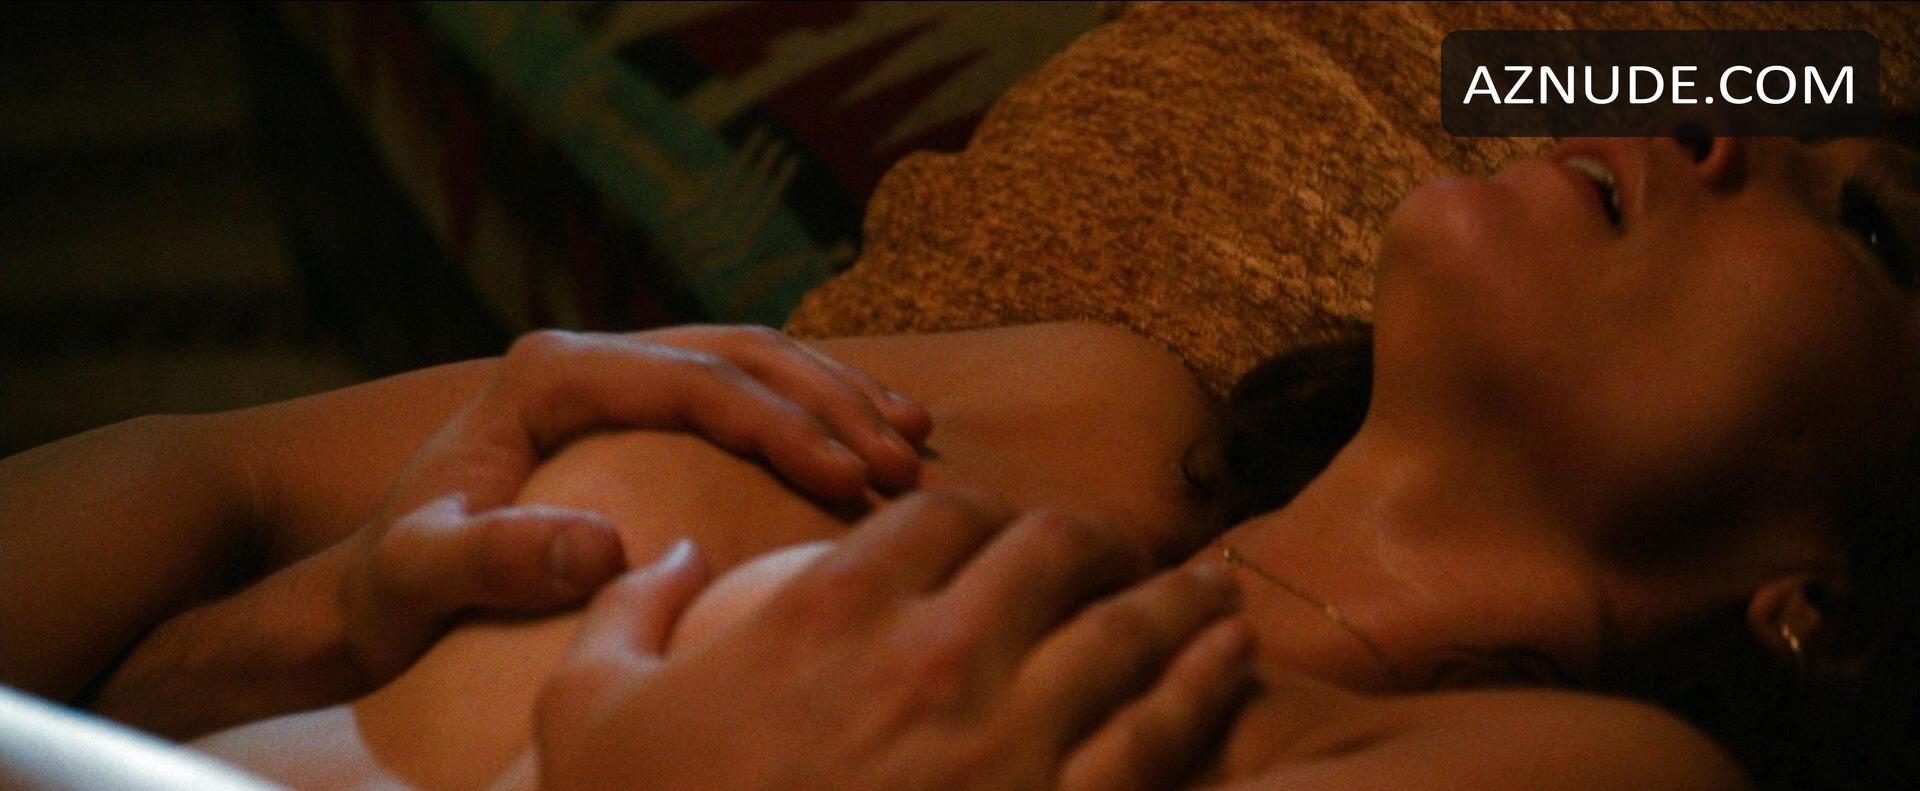 Browse Celebrity Hands Images Page Aznude